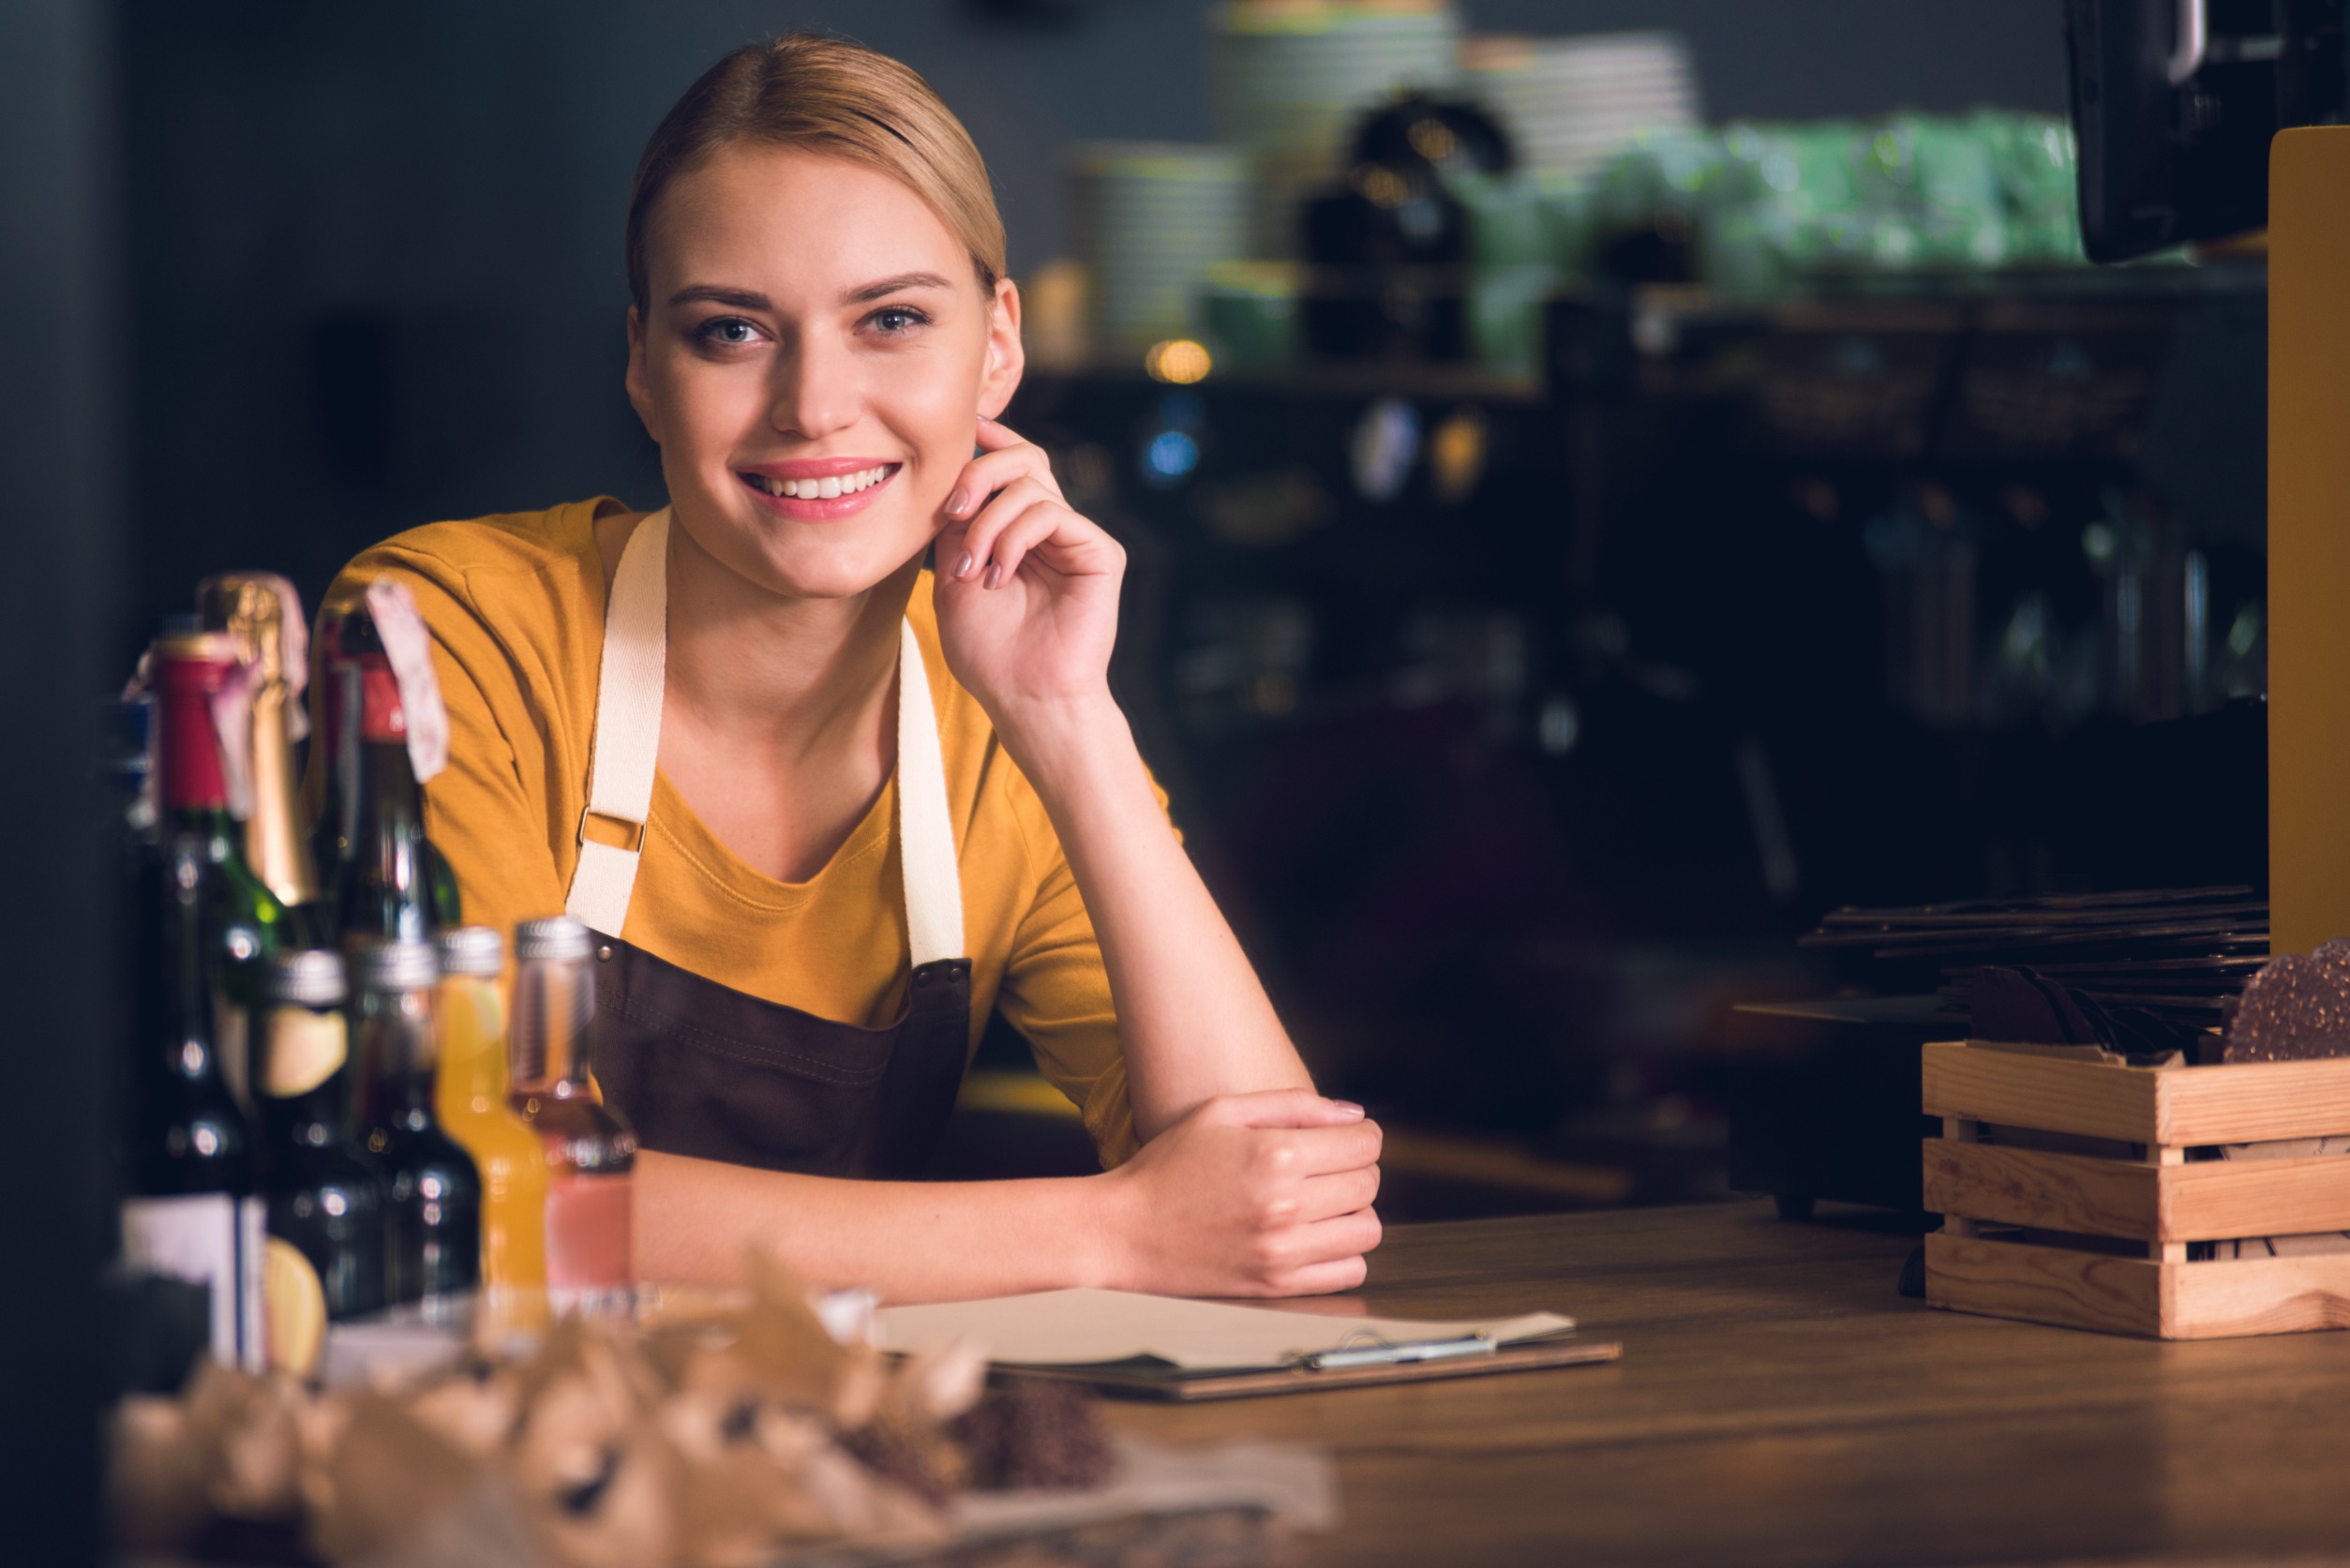 "Is the service charge included, or do I need to add more?" If the bill already includes a service charge, you might debate whether an additional tip is necessary. Clarifying this can help you avoid double-tipping or under-tipping. :: 123rf